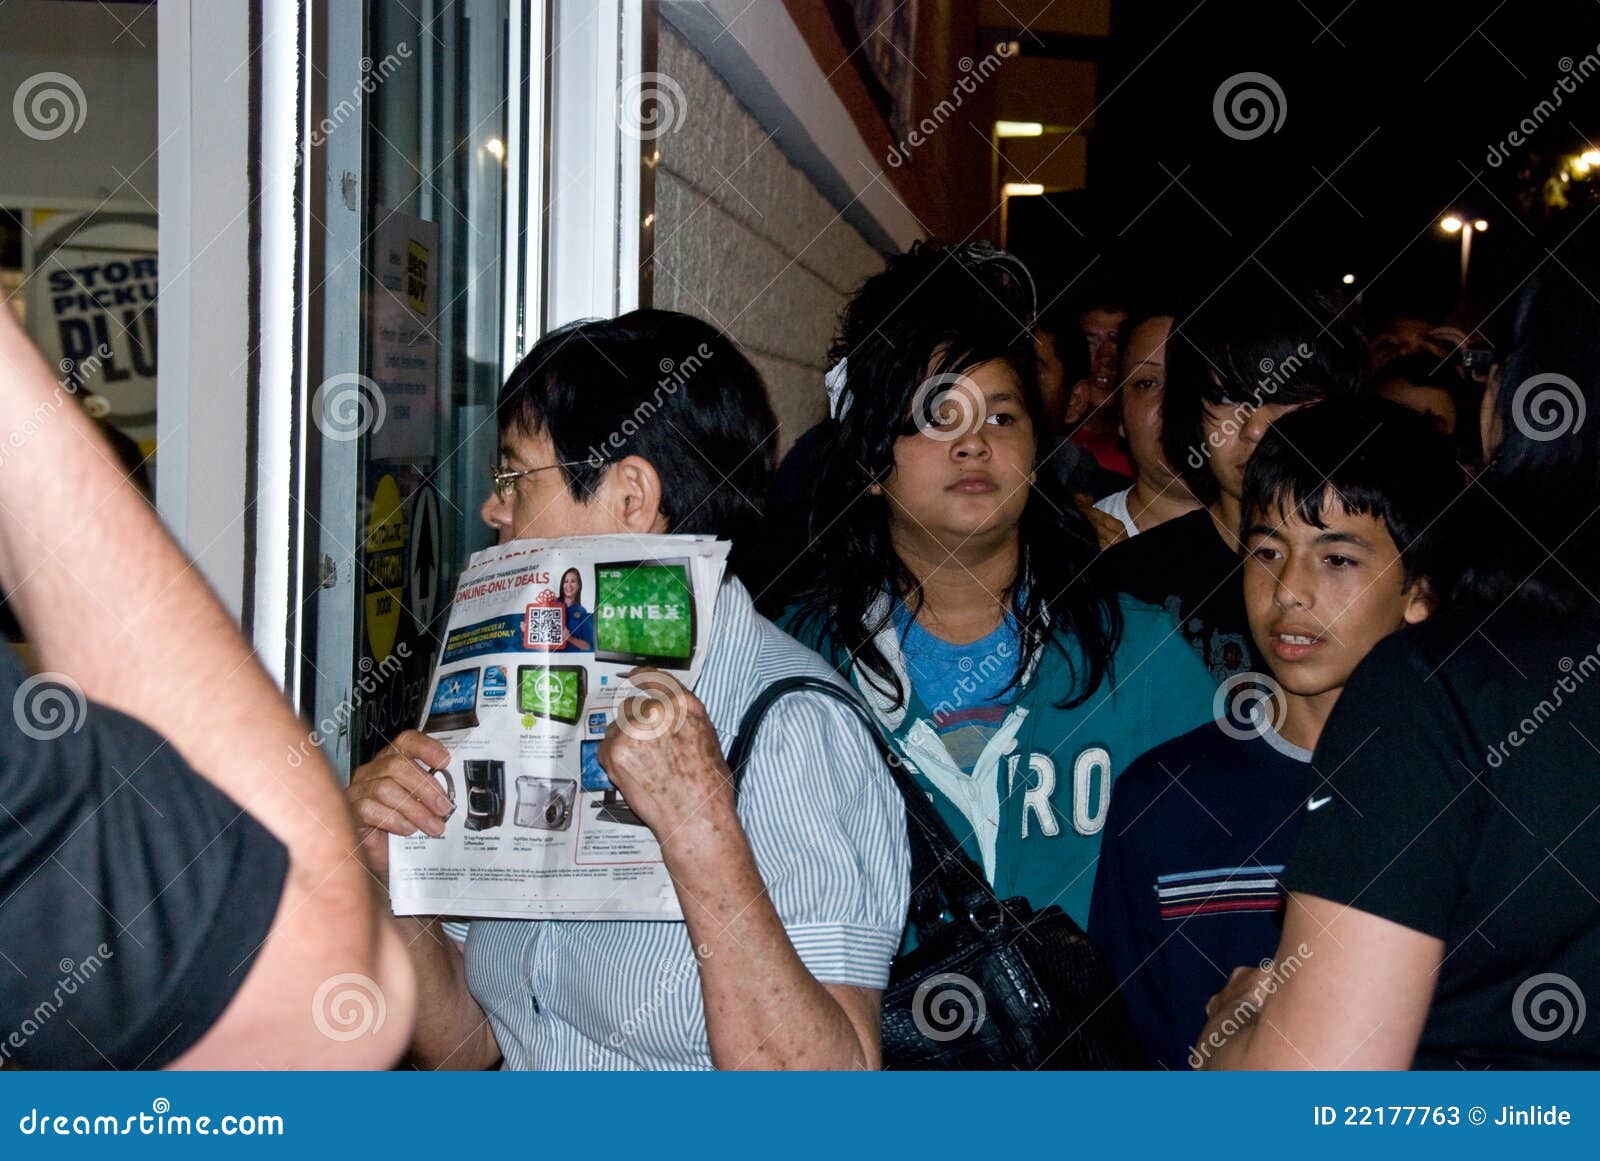 Rush Into Store On Black Friday Editorial Stock Photo - Image of rush